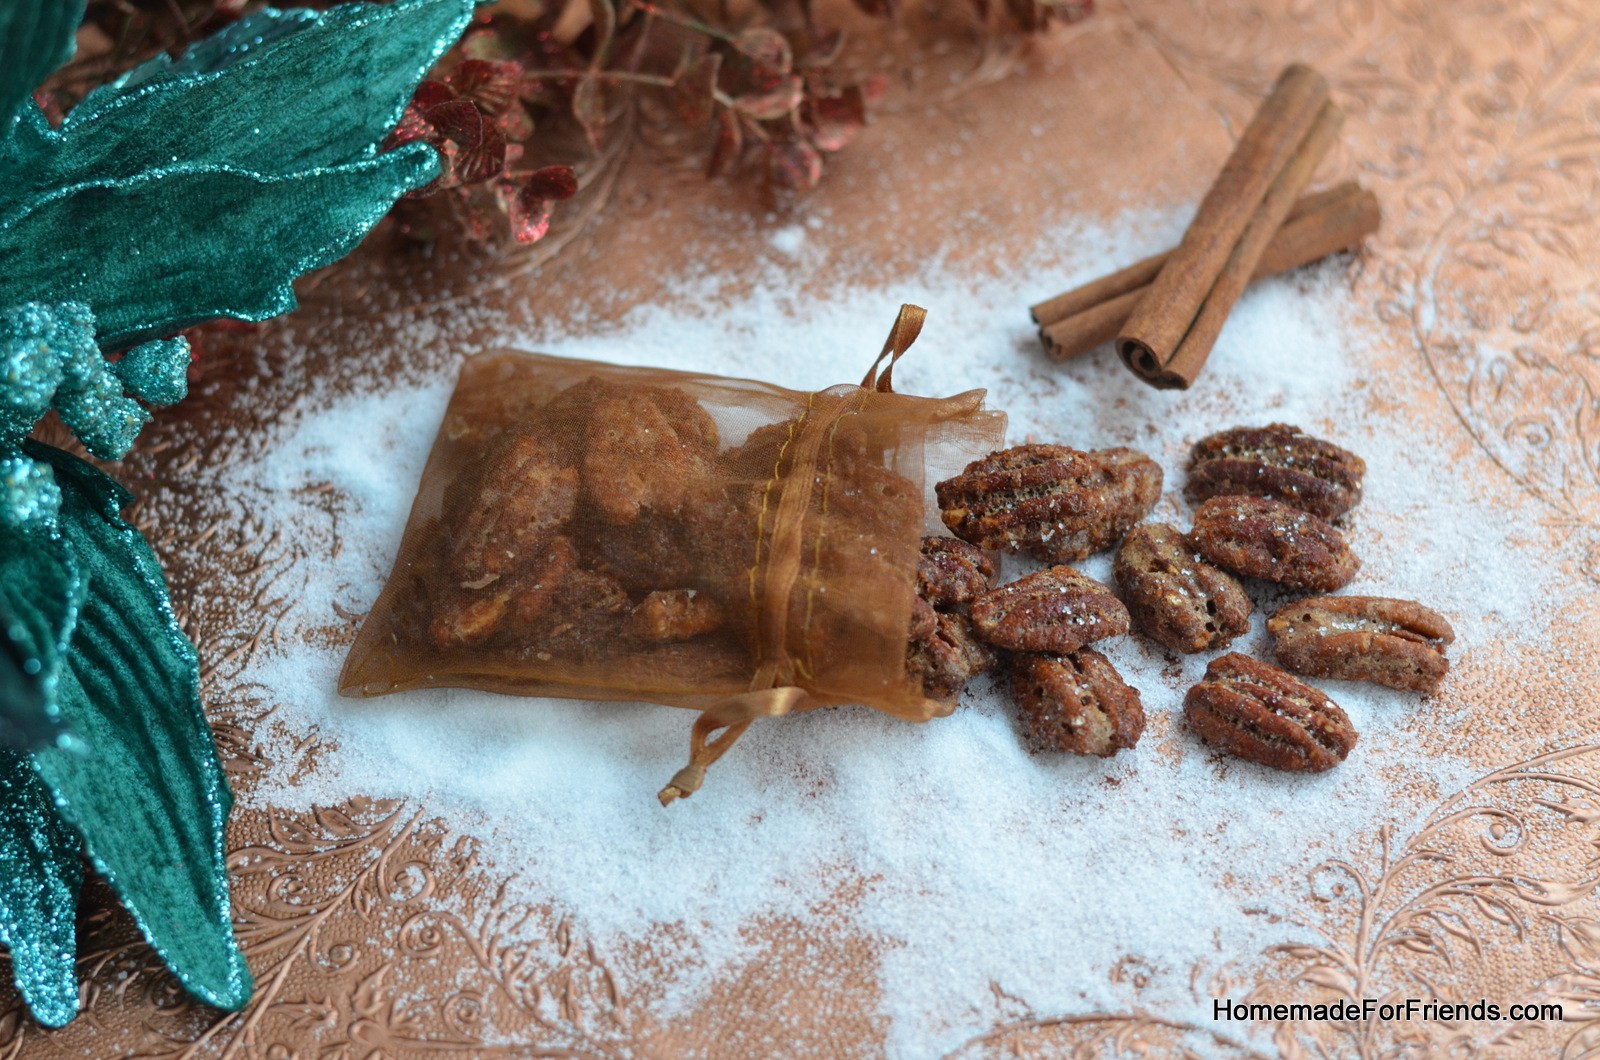 These candied pecans are so versatile: enjoy them on their own or as a topping over a favorite salad or dessert.